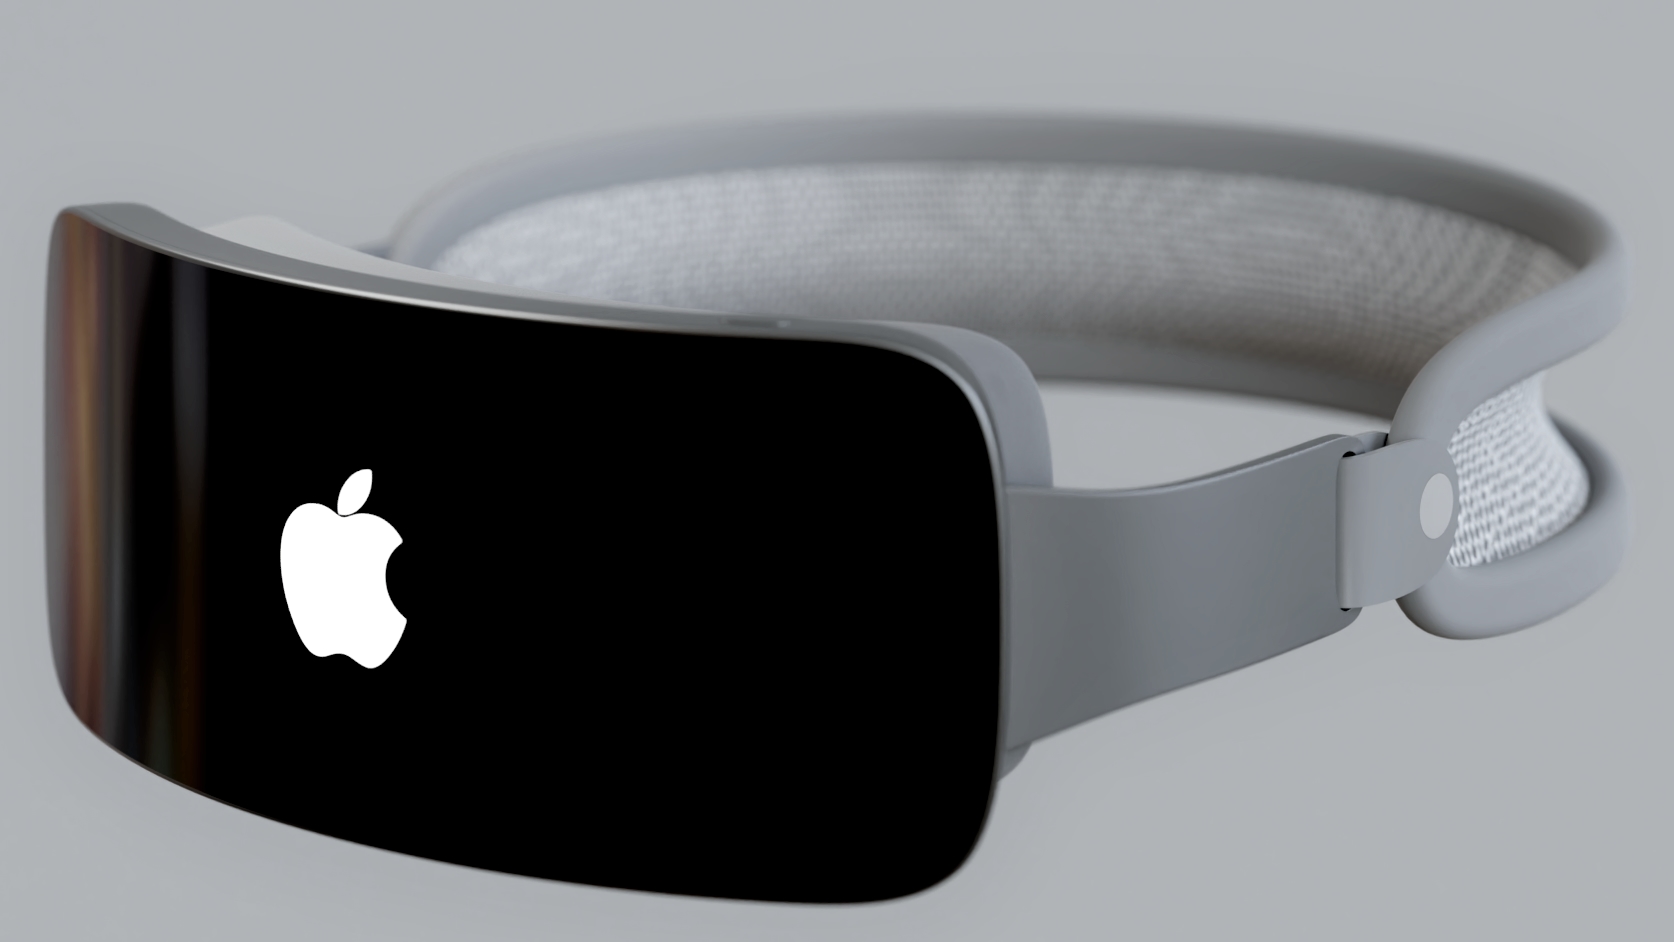 Rendering showing an Apple headset with the Apple logo on the external display